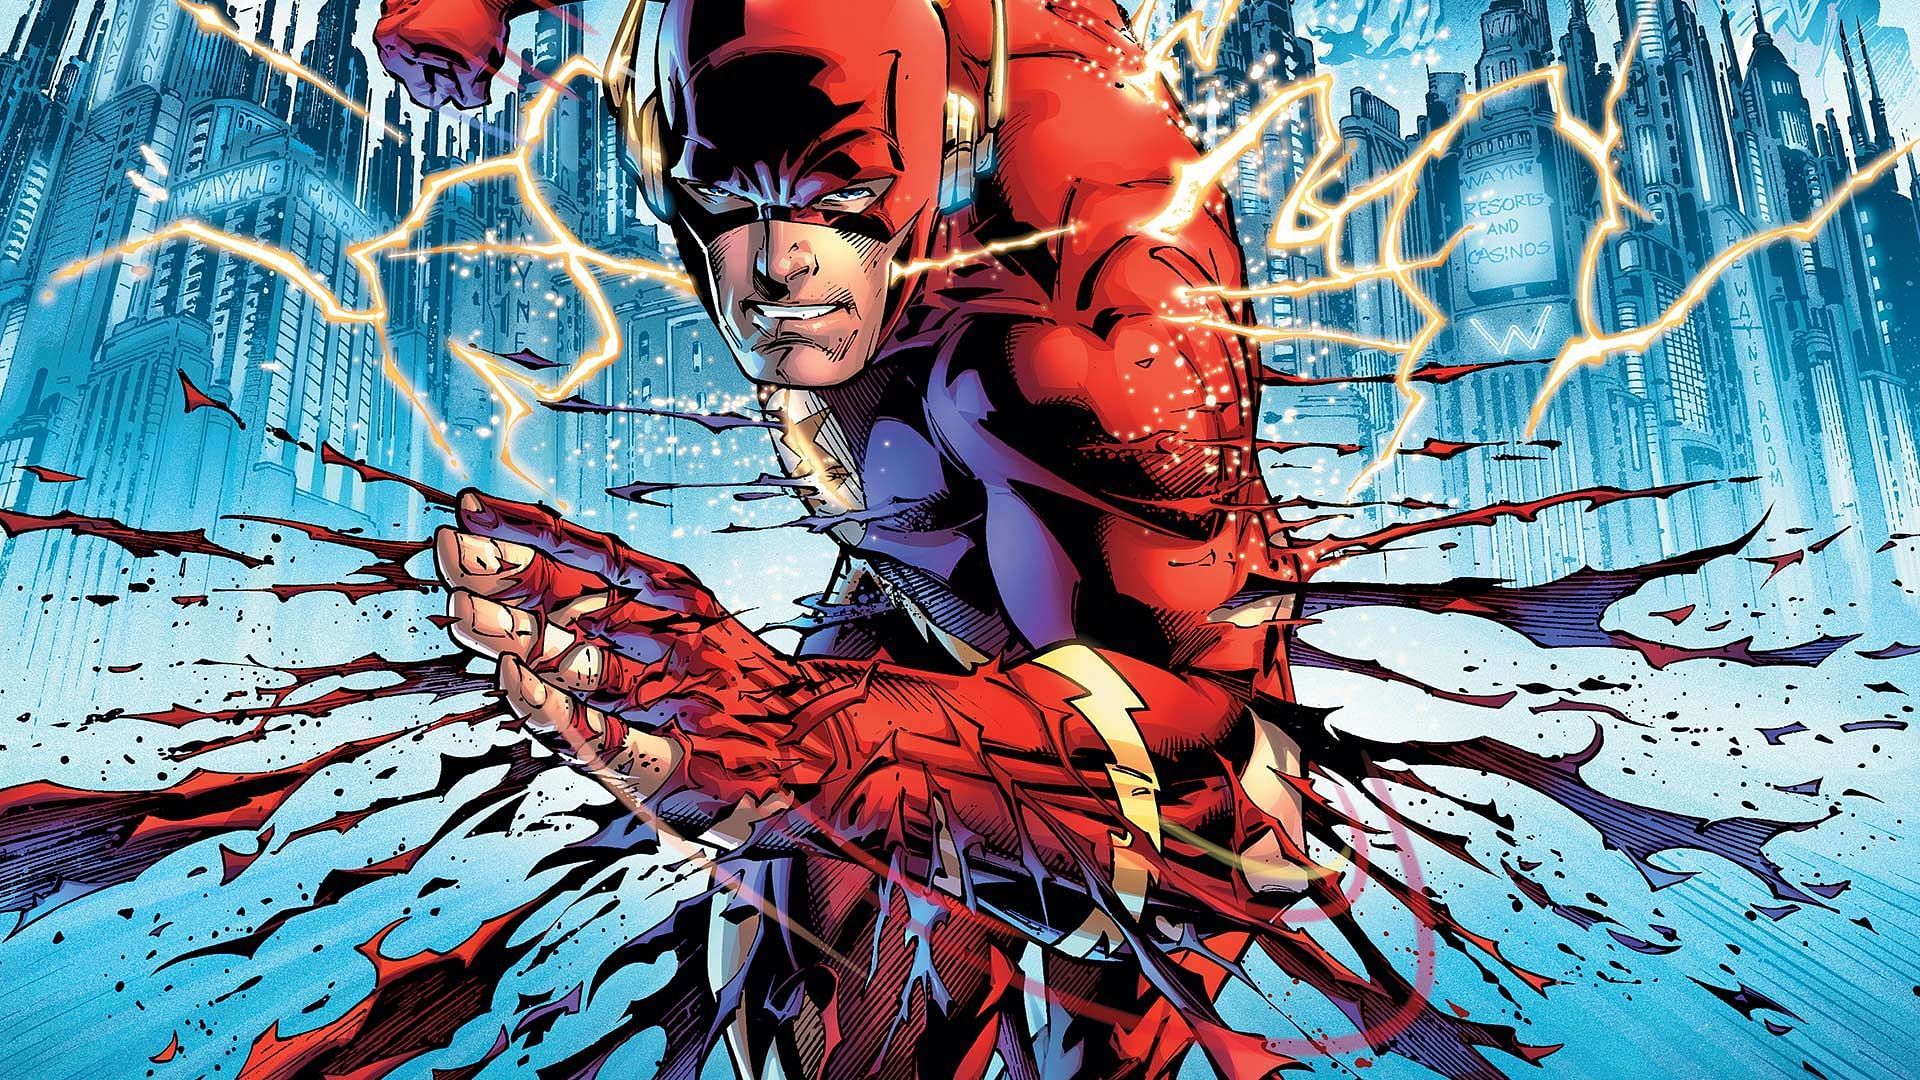 Flashpoint: The comic book storyline that inspired The Flash